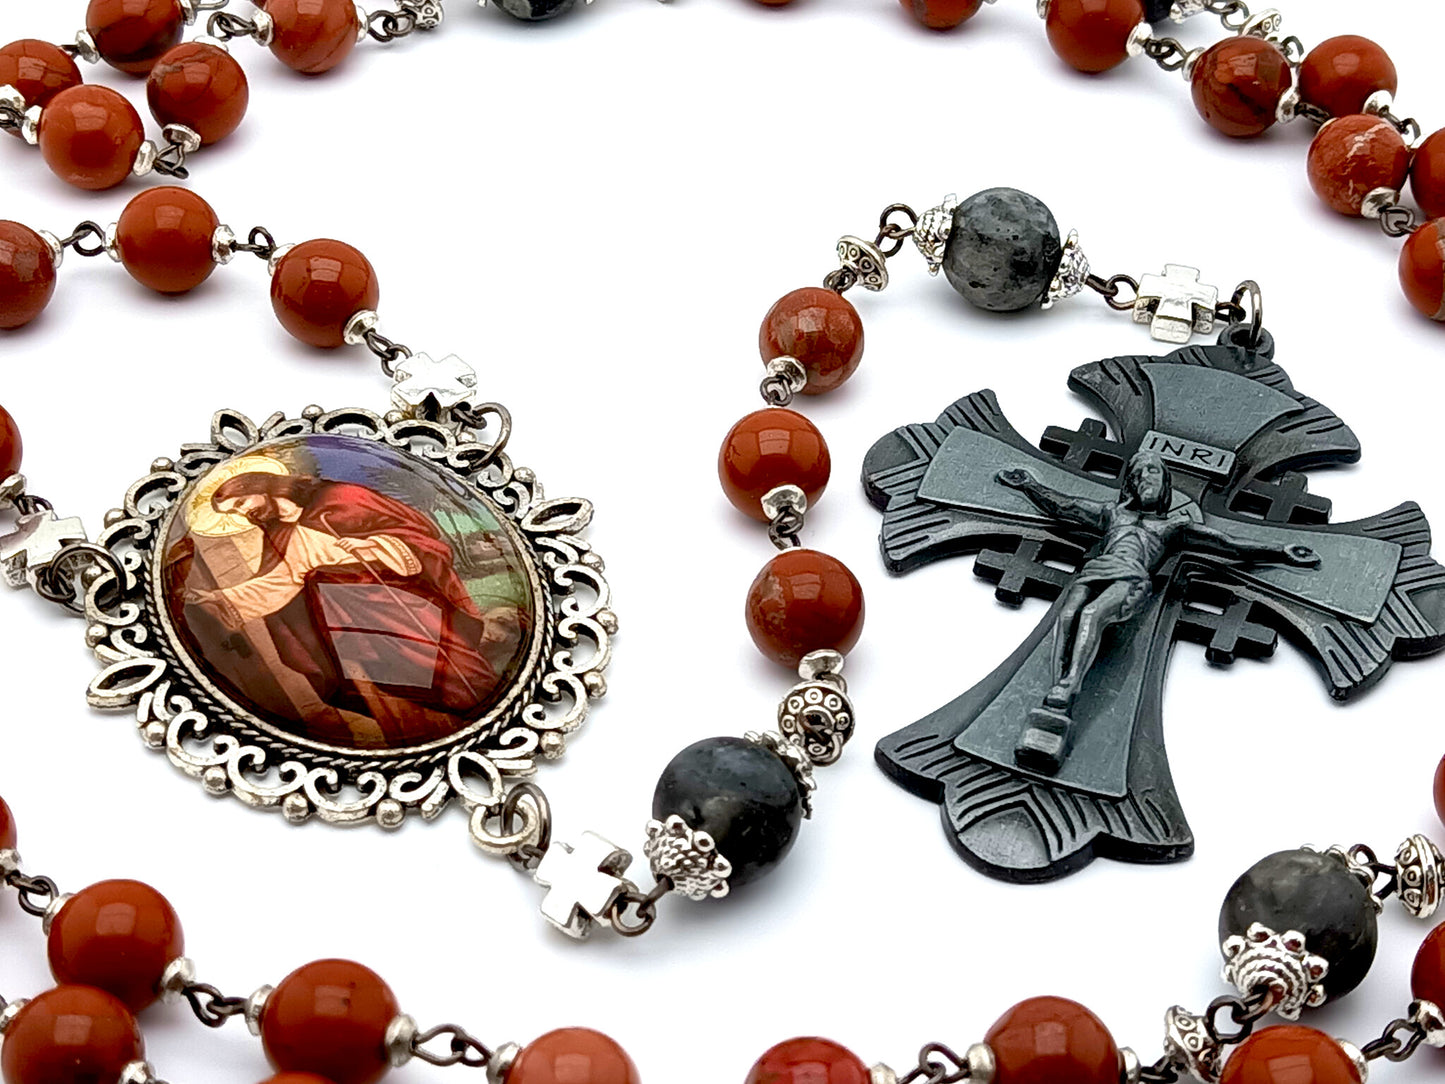 The Good Shepherd unique rosary beads with red jasper and larvikite gemstone beads, pewter crucifix and silver picture centre medal.